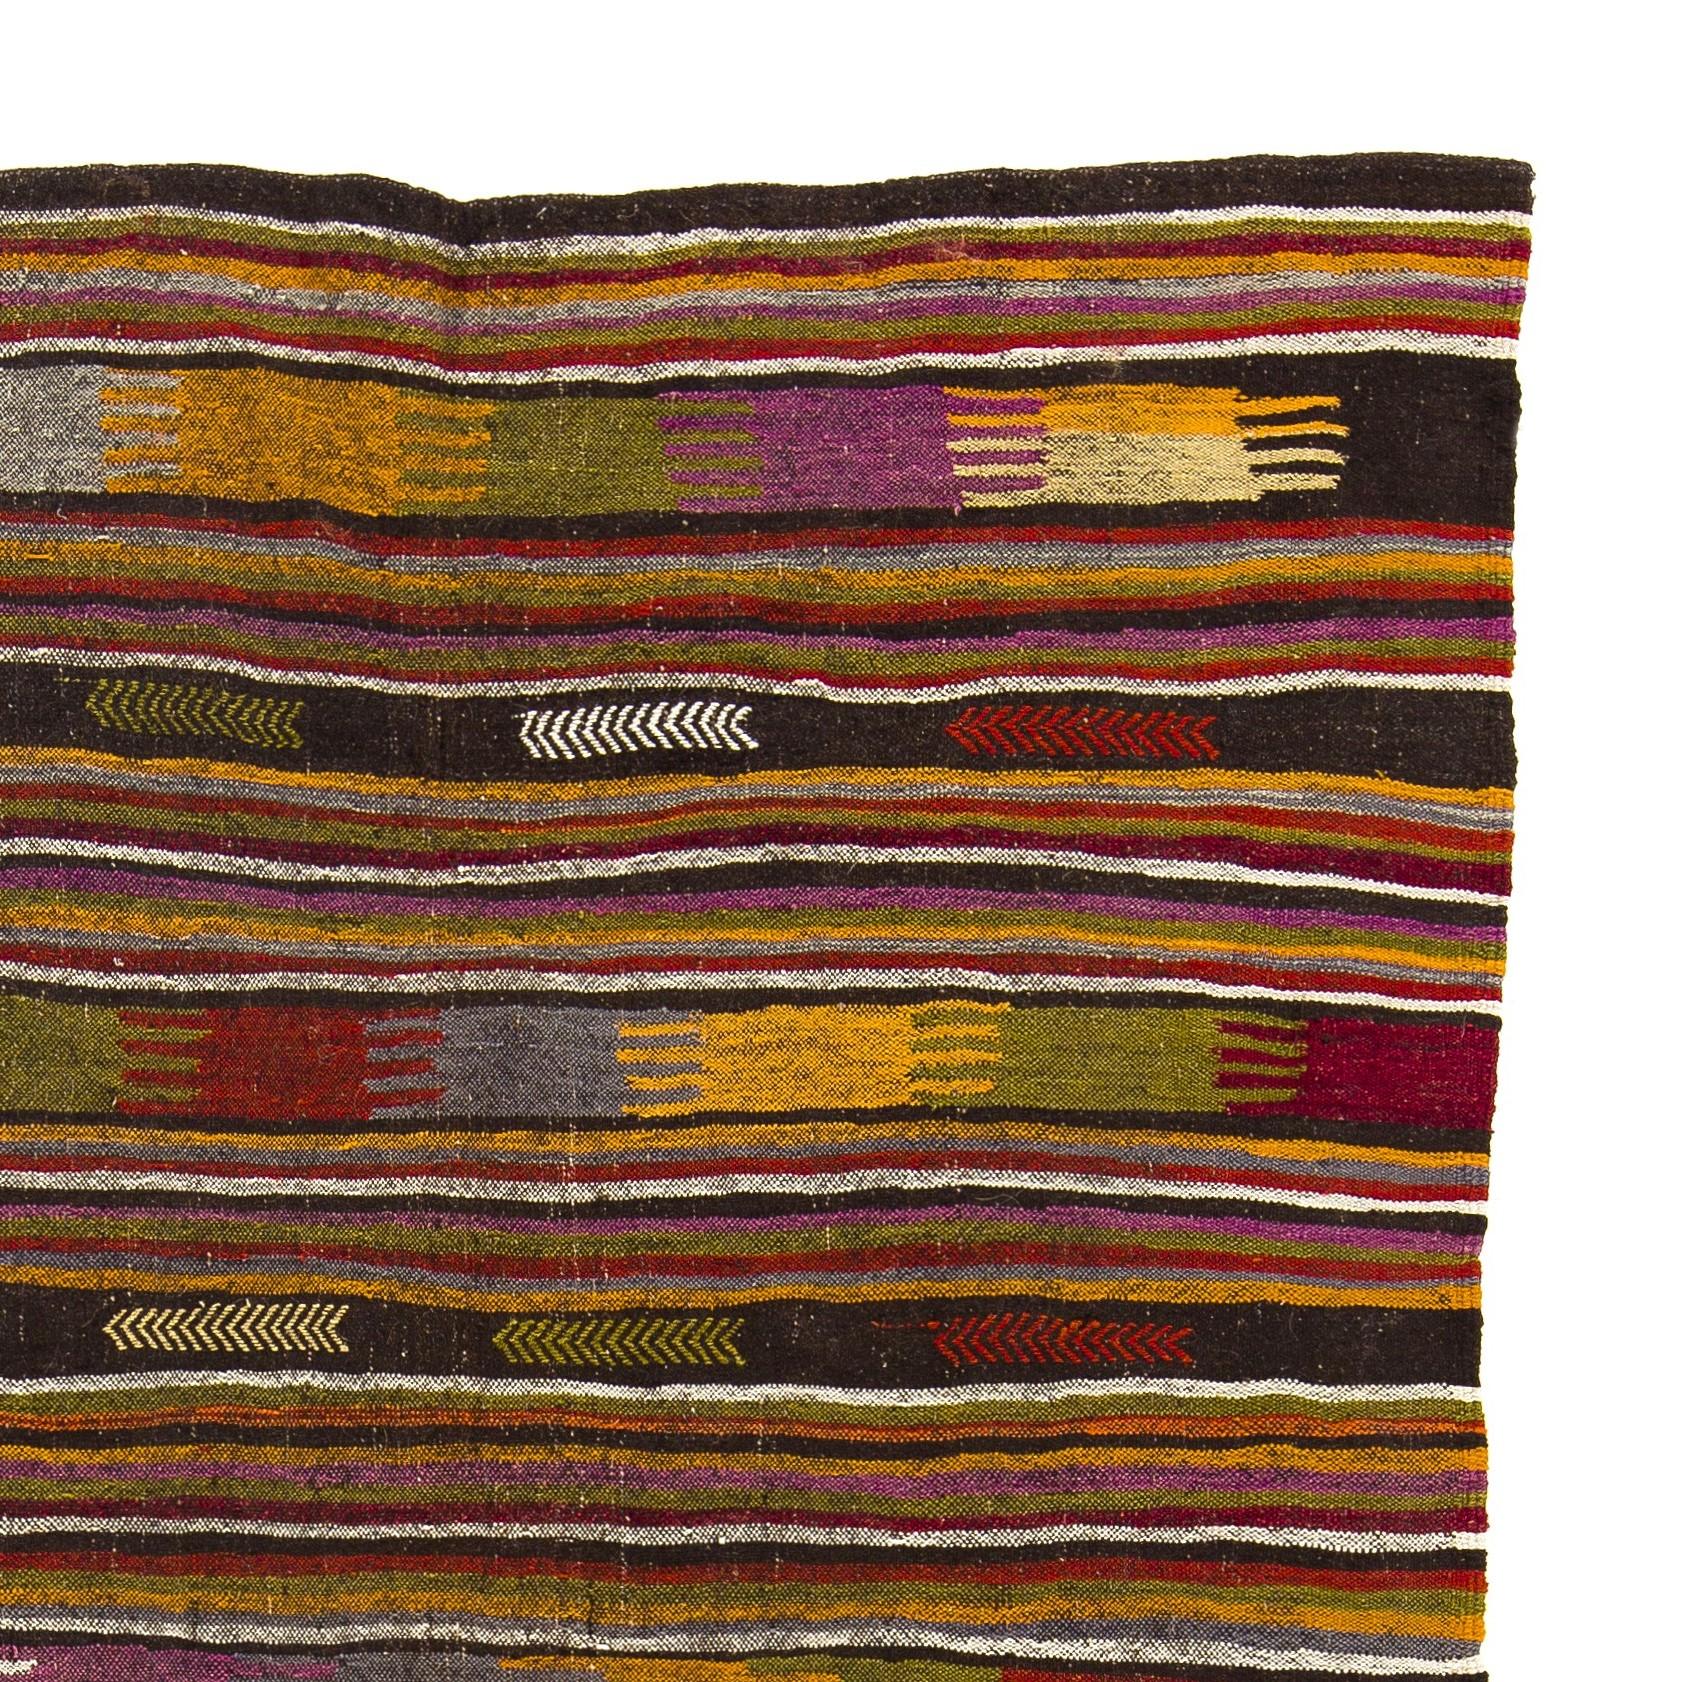 A colorful handwoven vintage nomad Kilim rug from the south of central Anatolia made of natural organic wool and goat's hair. In very good condition, sturdy and clean. Measures: 5.5 x 9.2 Ft.

This nomad Kilim is a pleasure to look at. Its